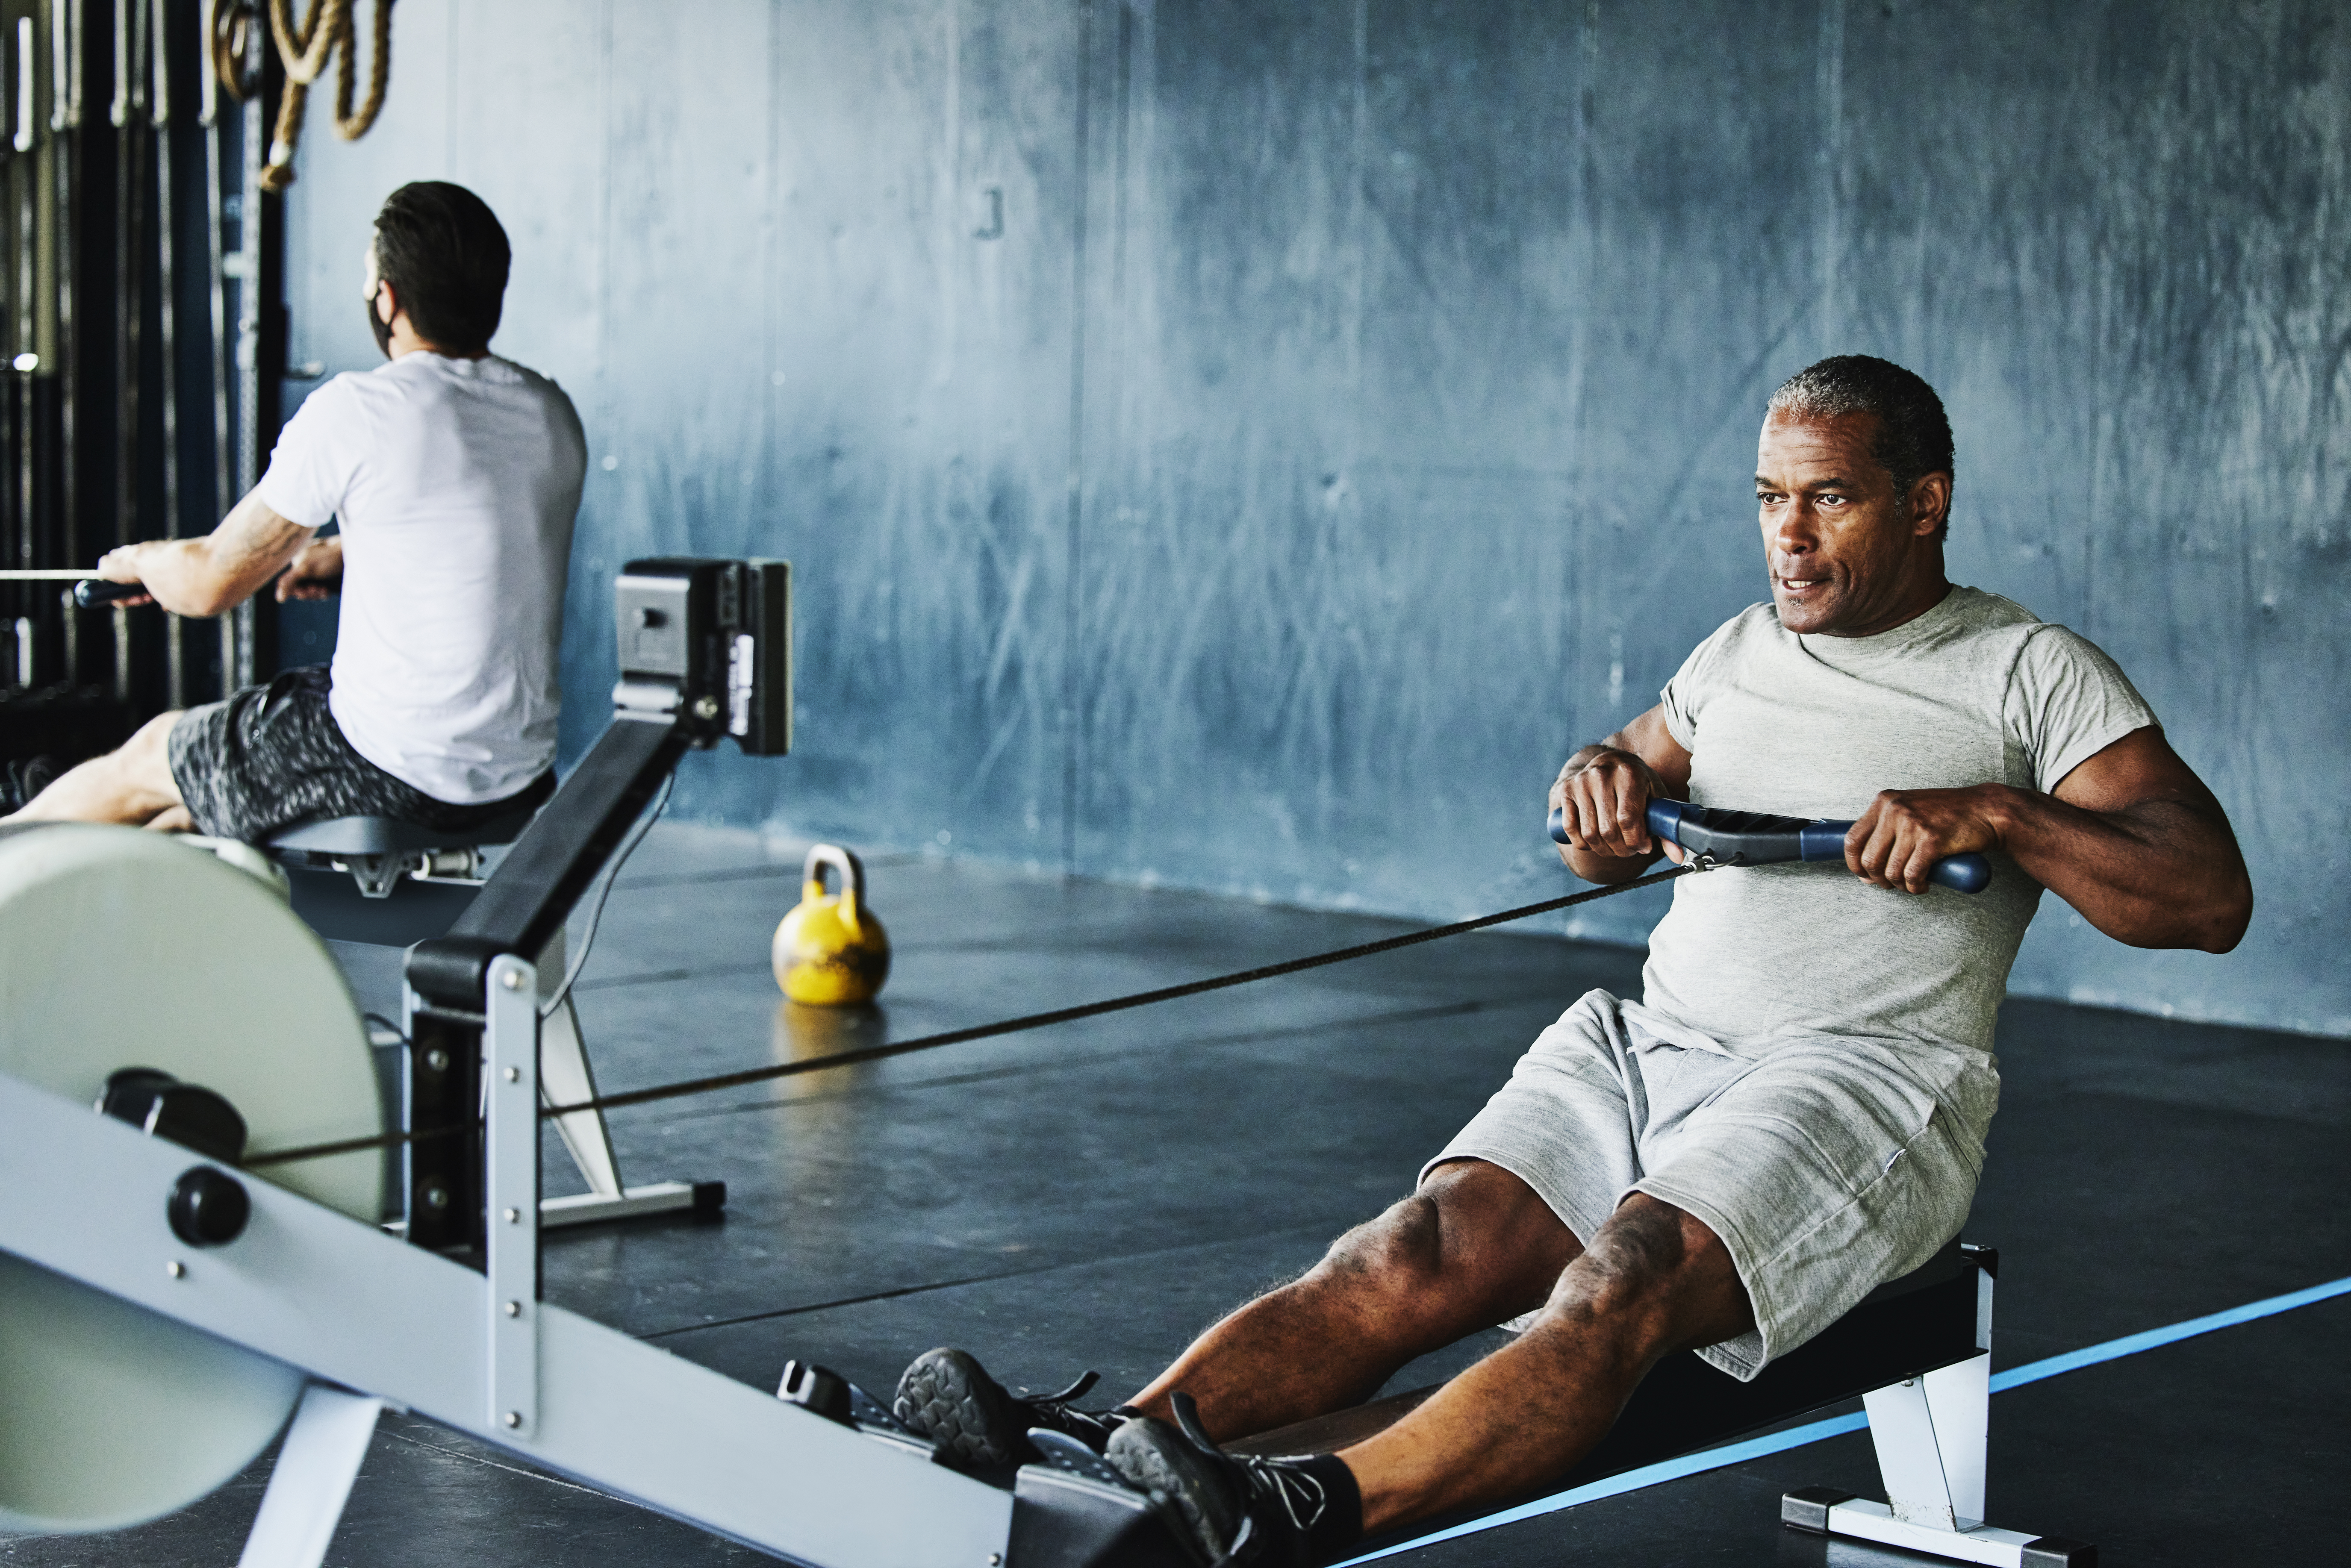 Rowing Machine Workout Plan for Beginners